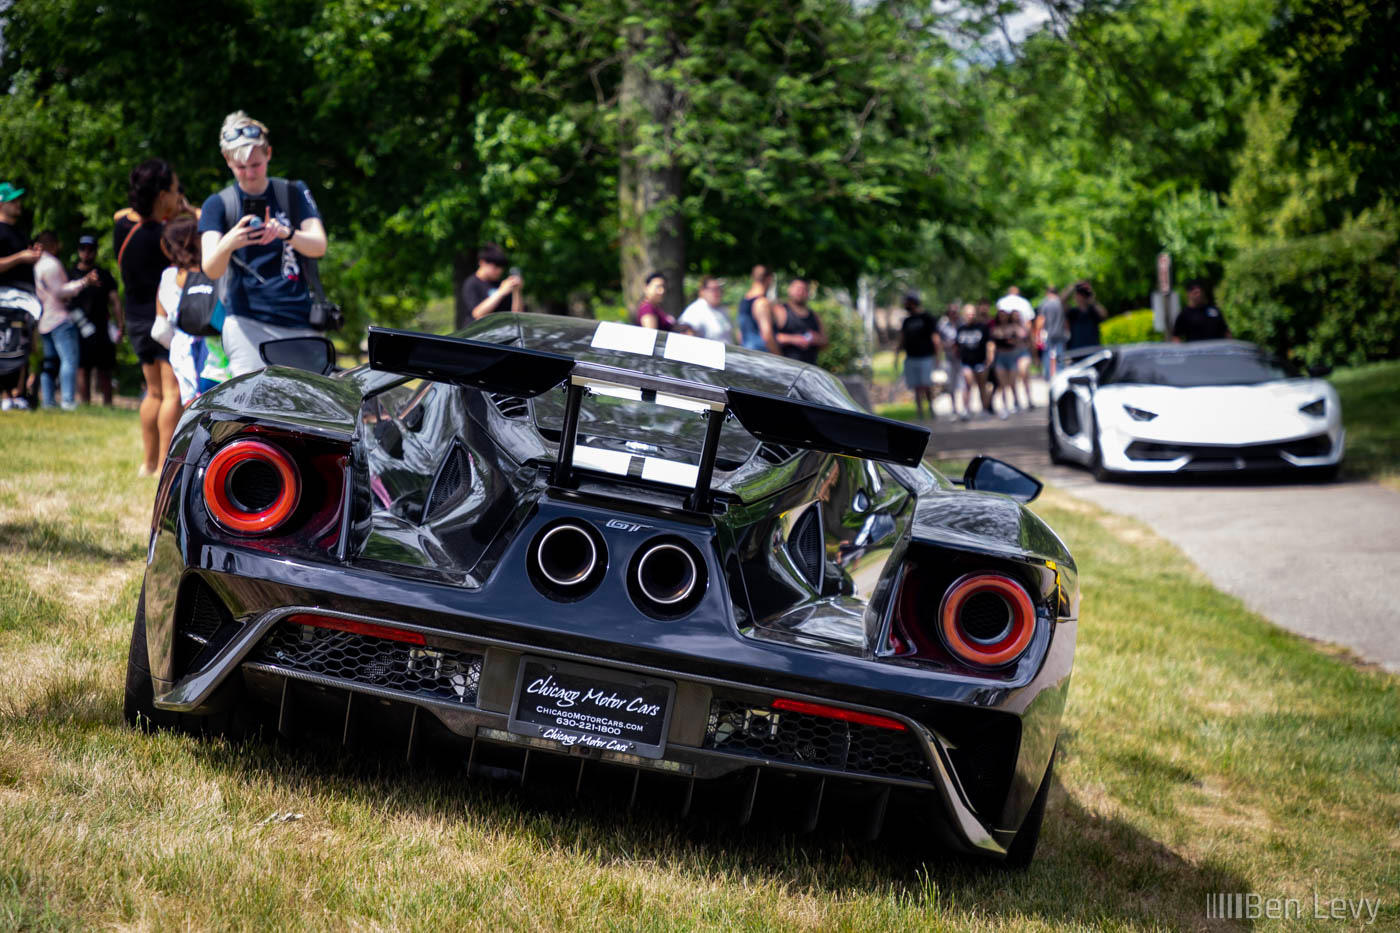 Rear of Black Ford GT from Chicago Motor Cars